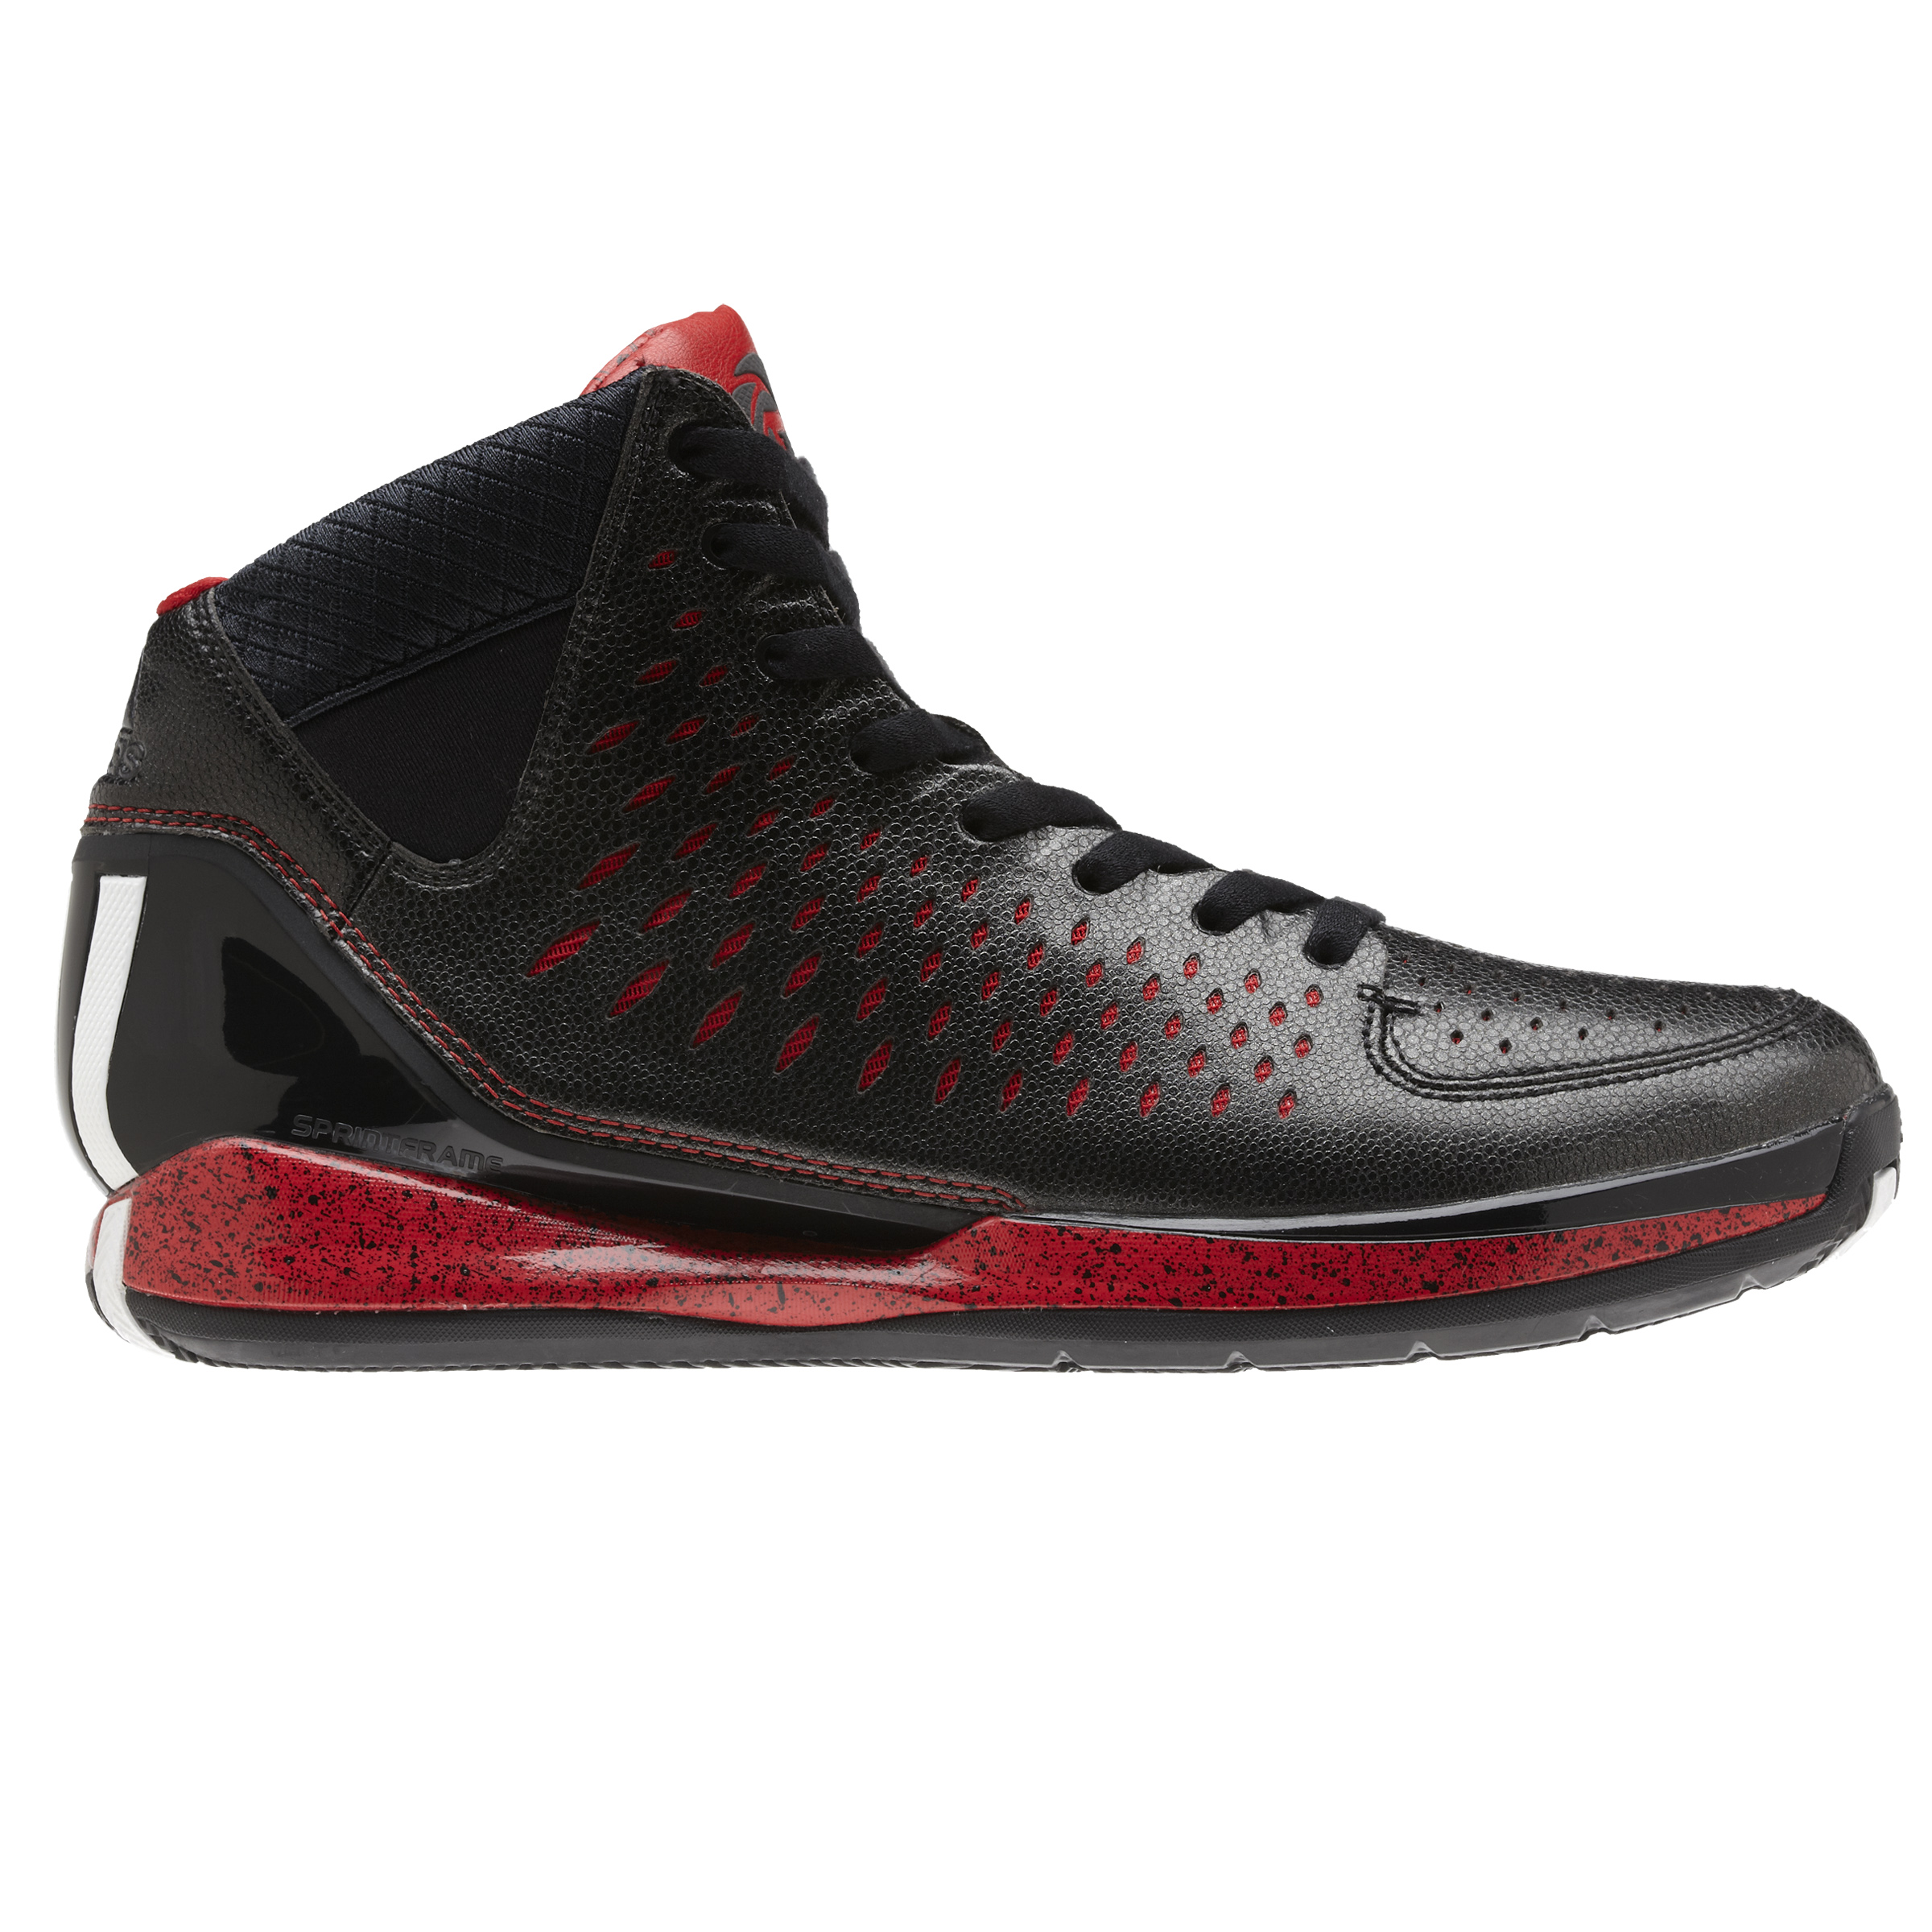 New adidas D Rose 3 Leads The Pack of Fresh New Basketball Kicks ...